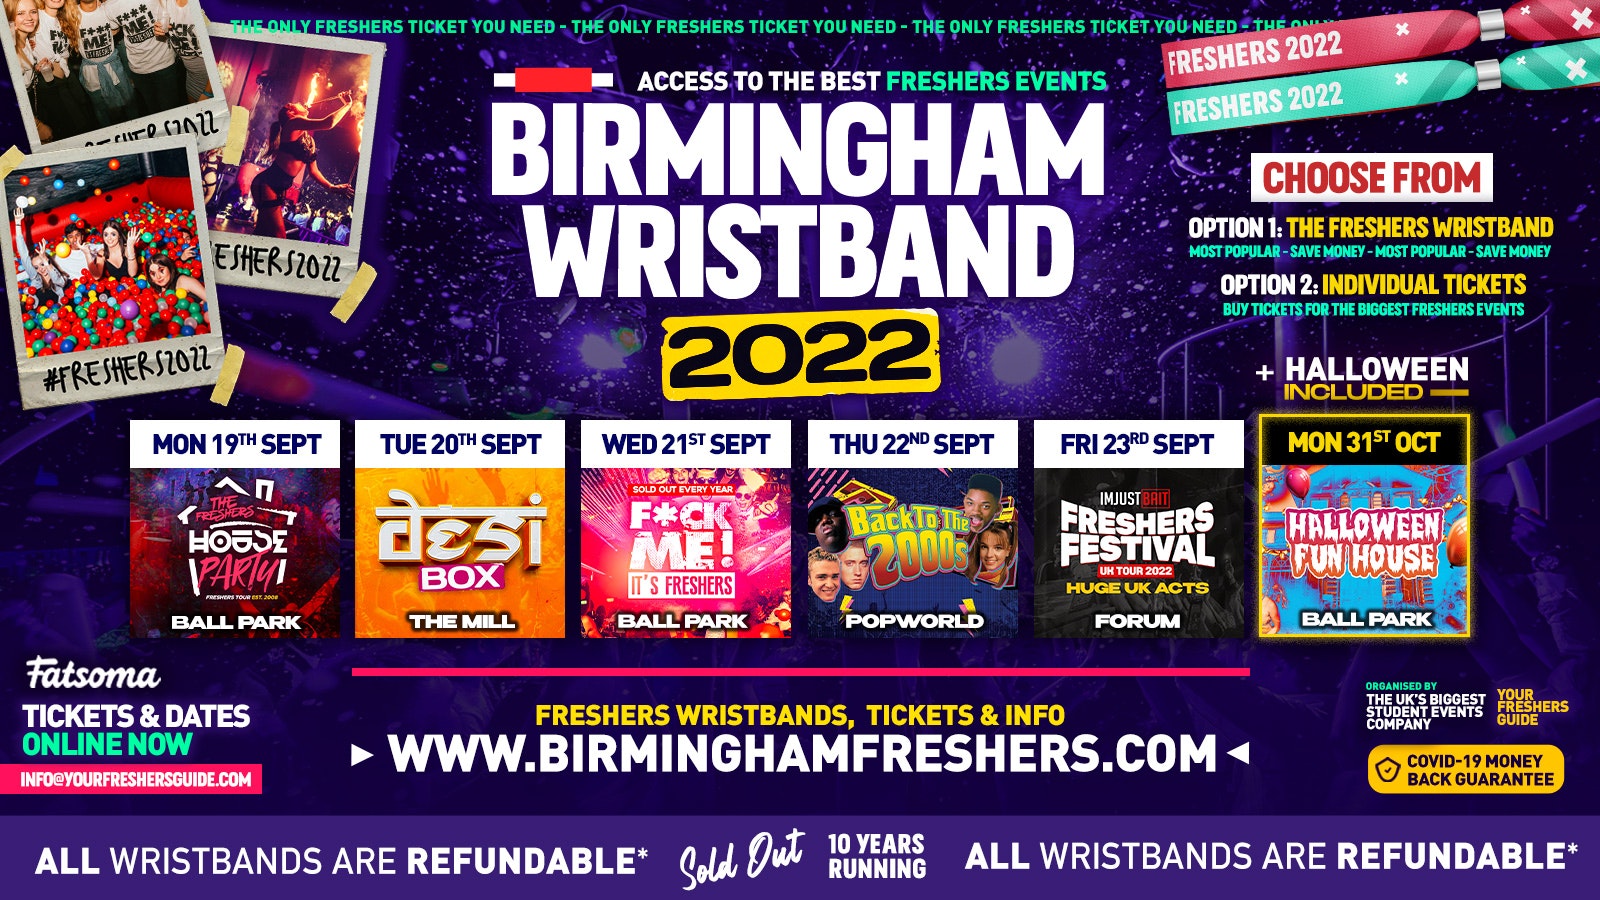 Birmingham Freshers 2022 🎉 – The Ultimate Freshers Guide – THE BIGGEST & BEST events for Freshers 2022✅ ! – ⬇️ GET YOUR WRISTBAND BELOW ⬇️